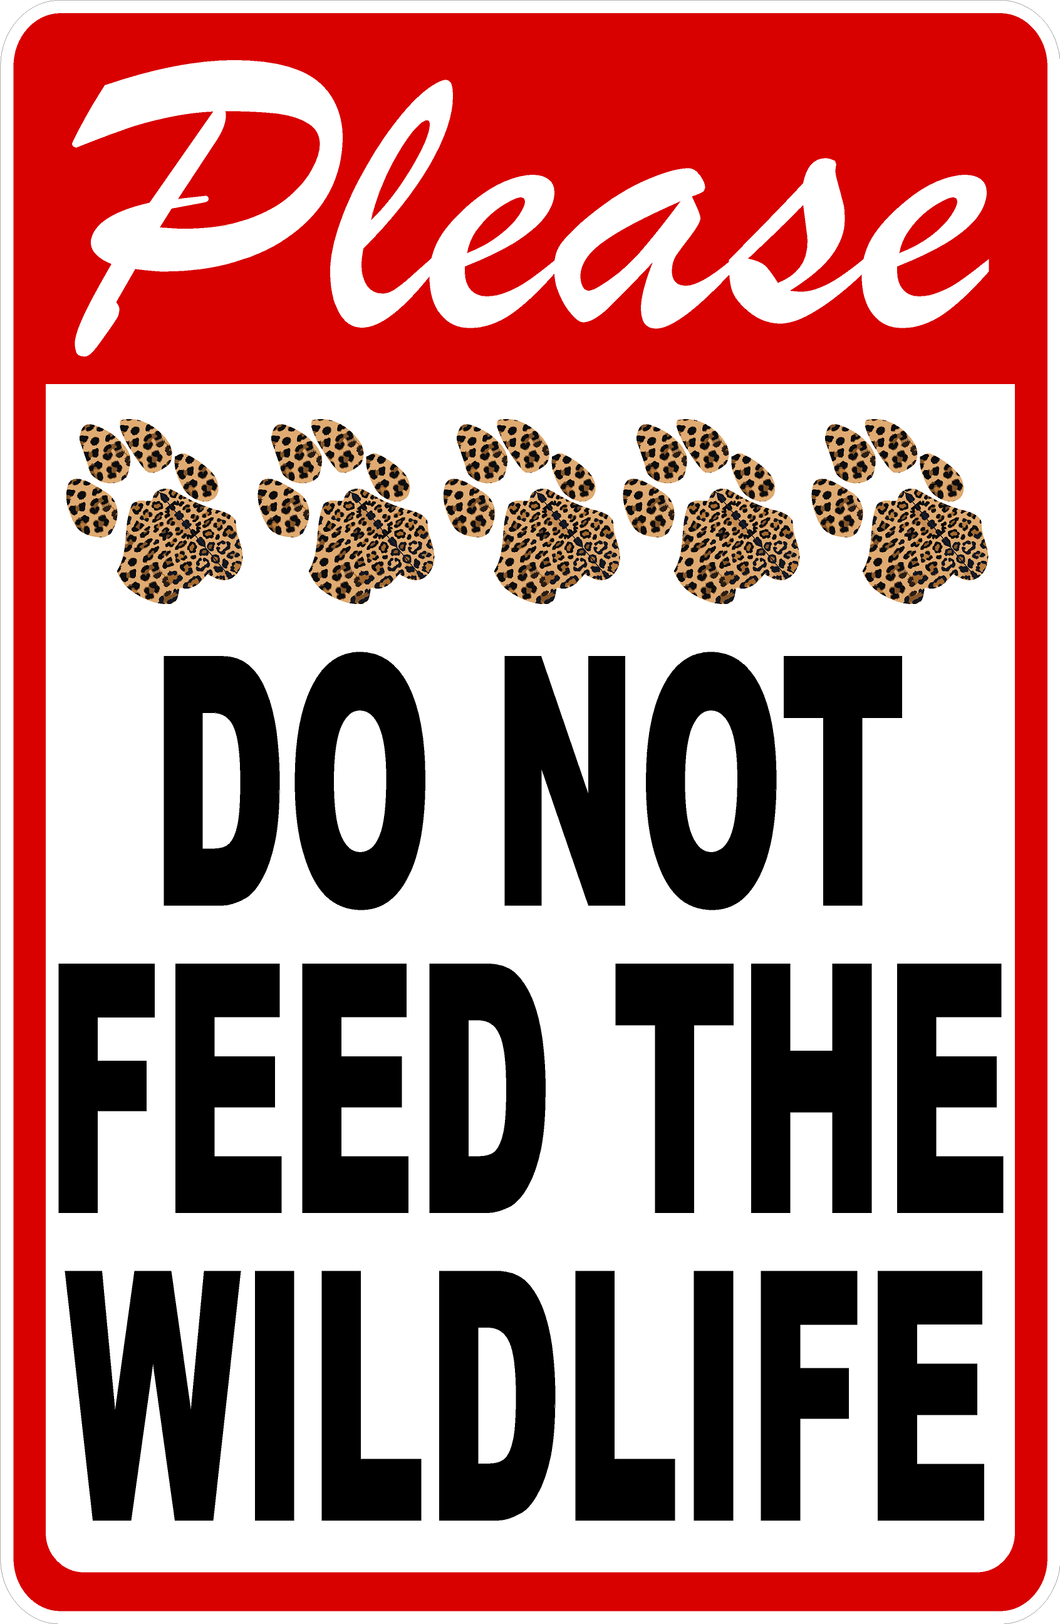 Do Not Feed Animals Sign